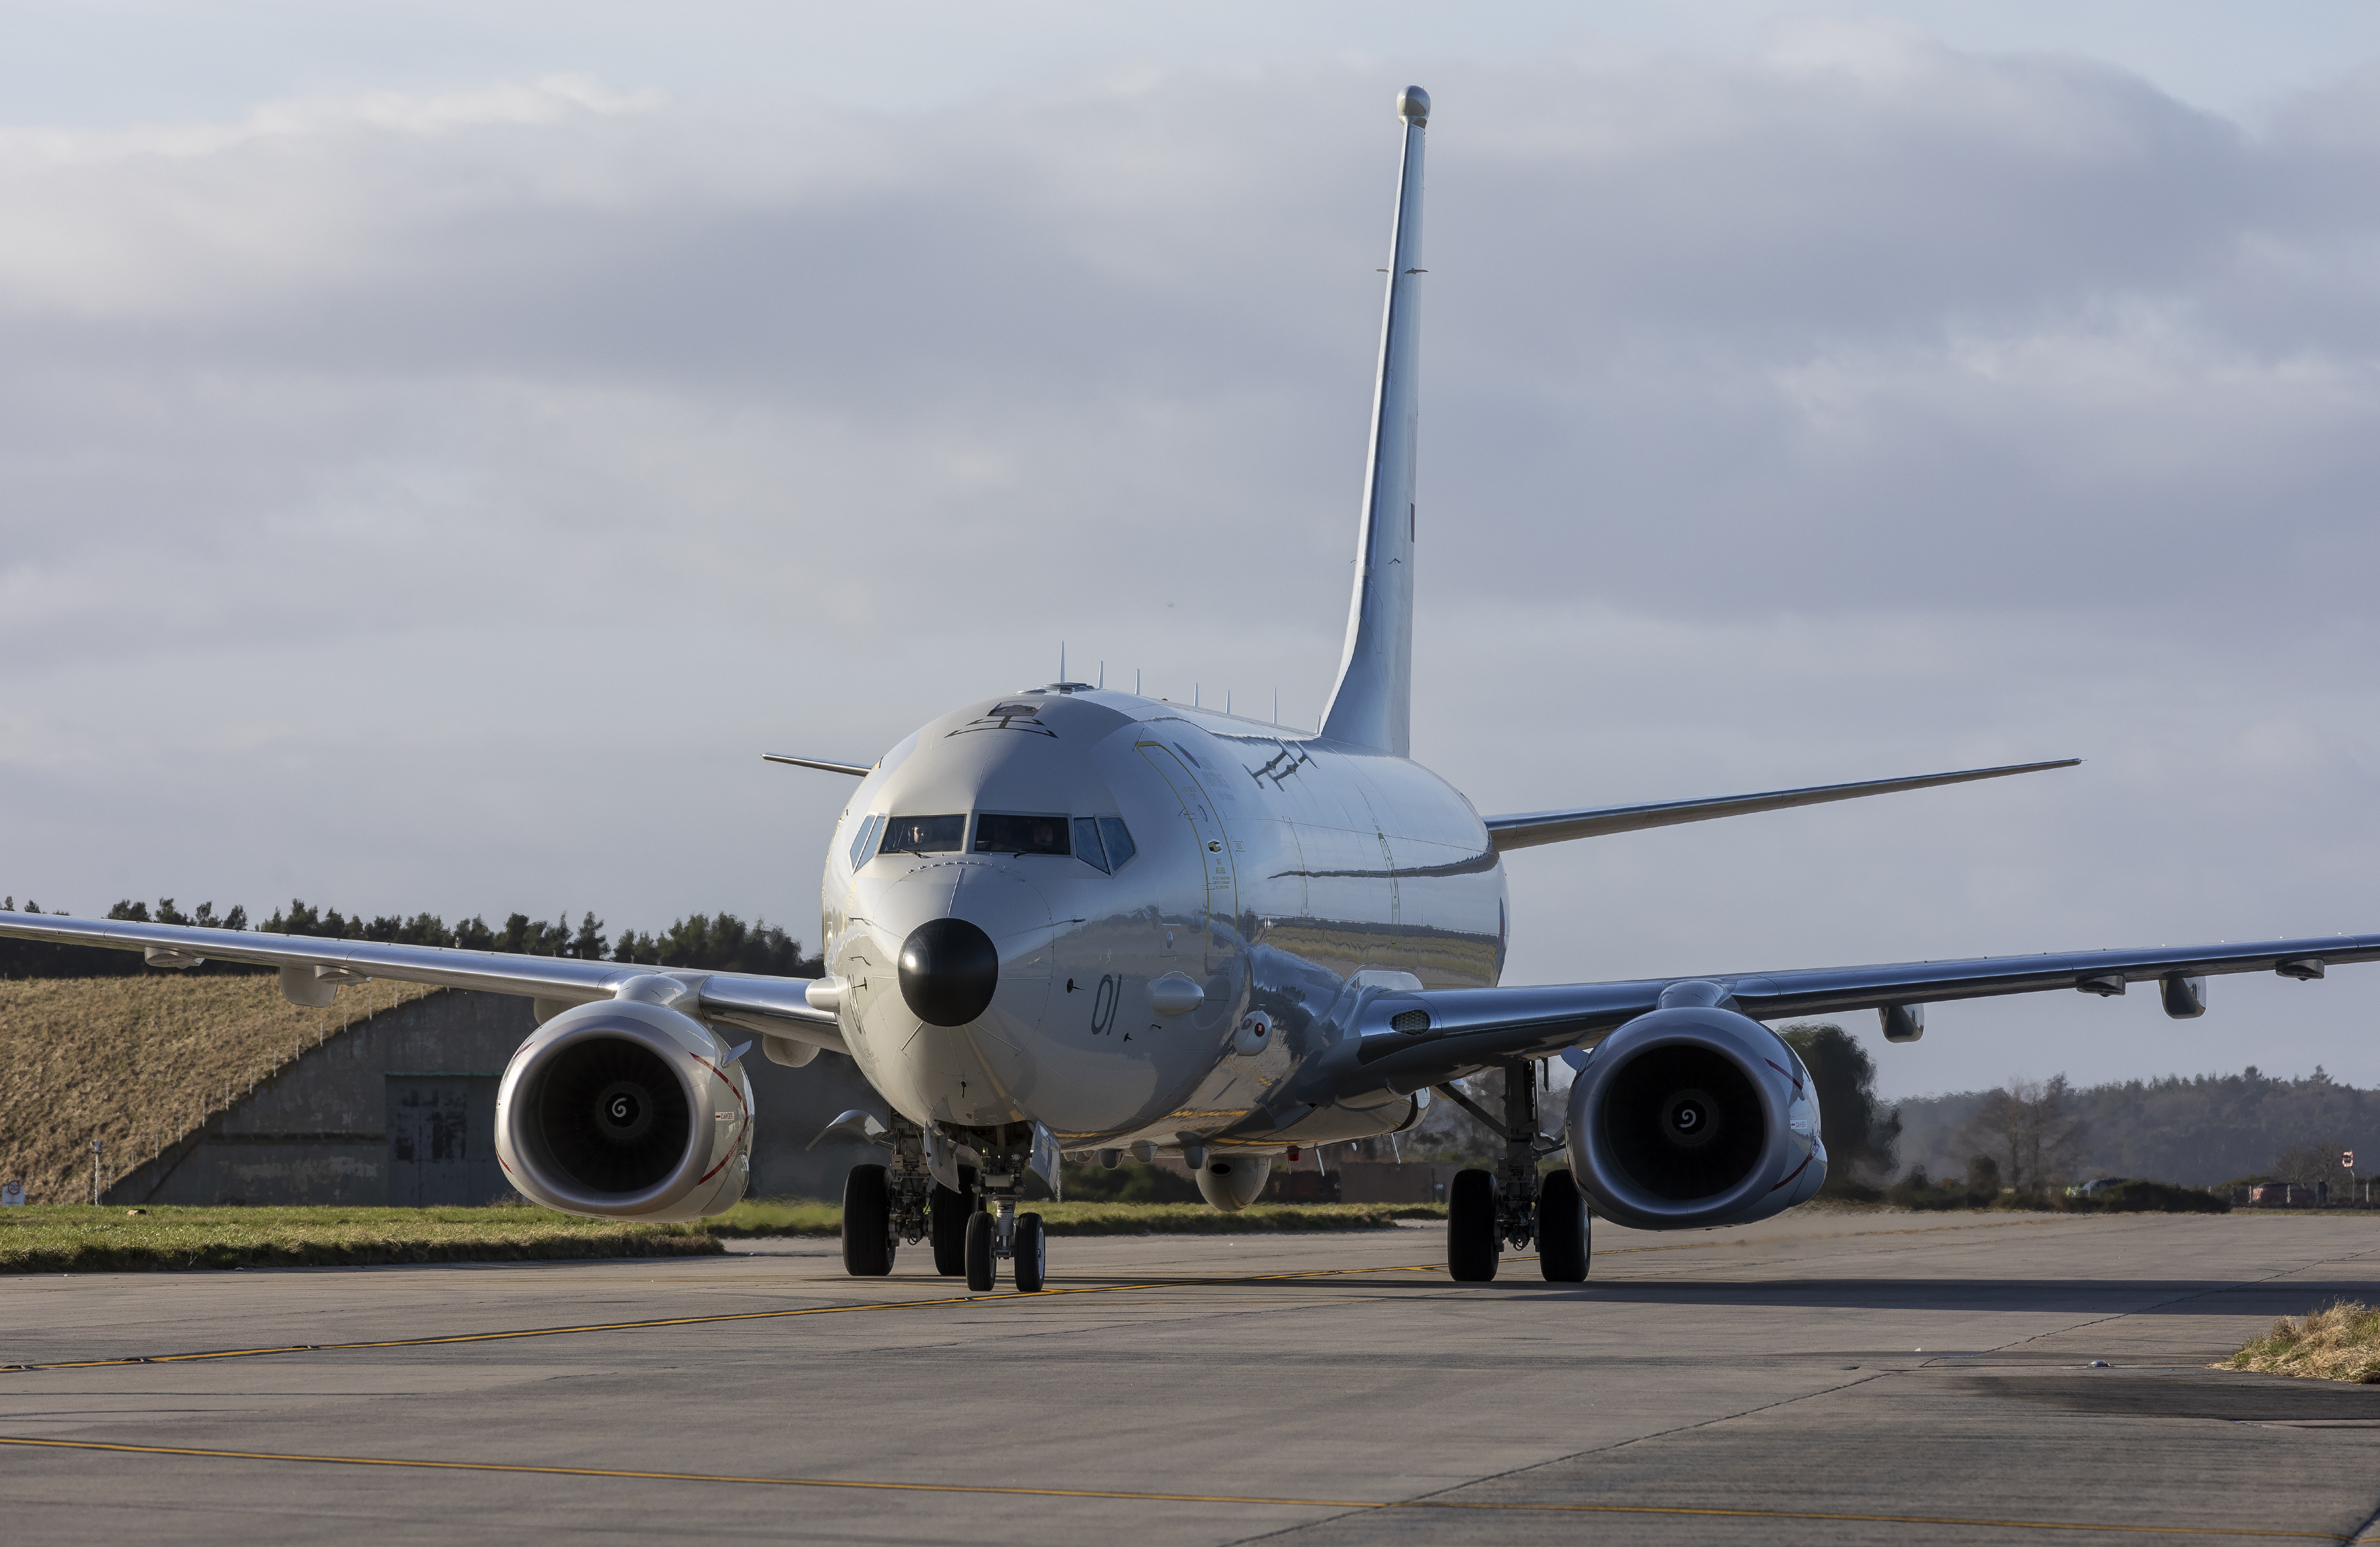 First Royal Air Force P-8 Poseidon MRA1 to Land in Scotland